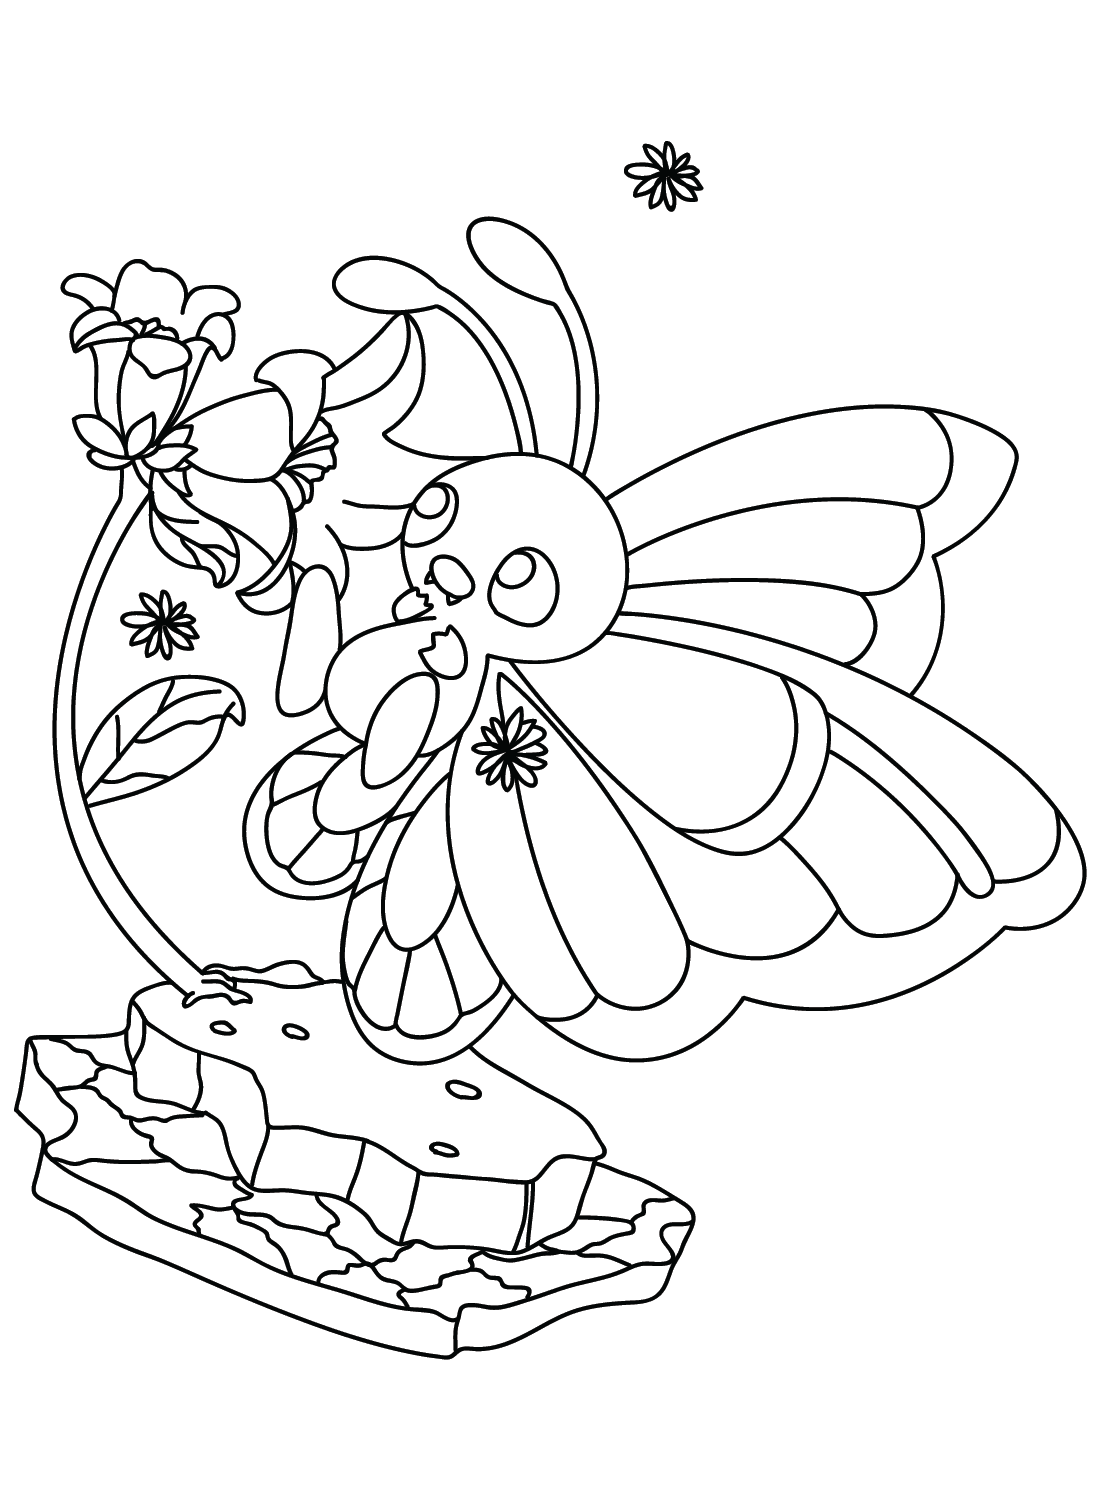 Butterfree Coloring Sheet for Kids from Butterfree